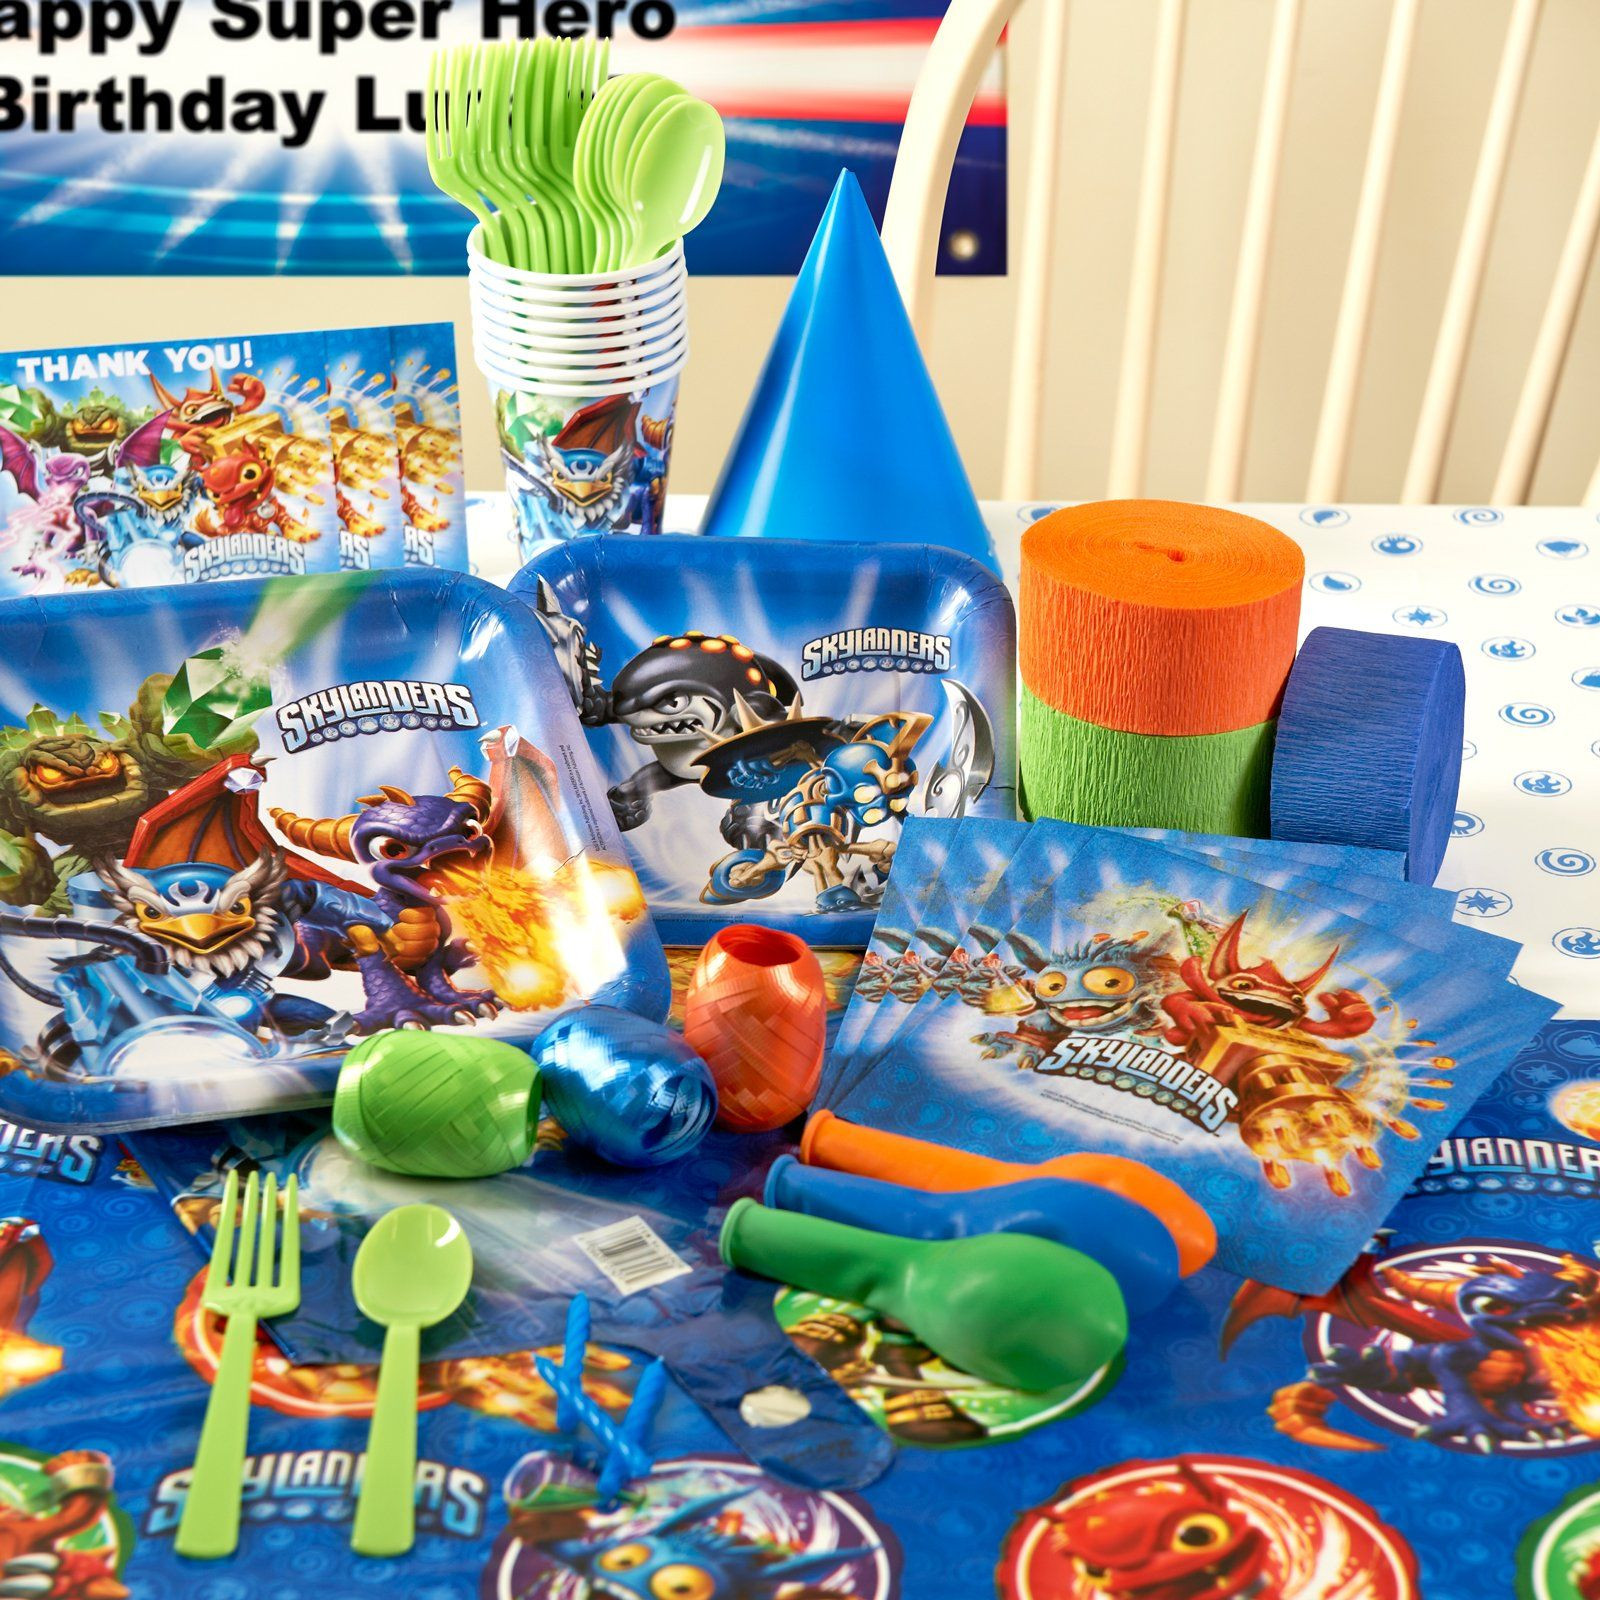 Skylanders Birthday Party
 Skylanders birthday party supplies collection